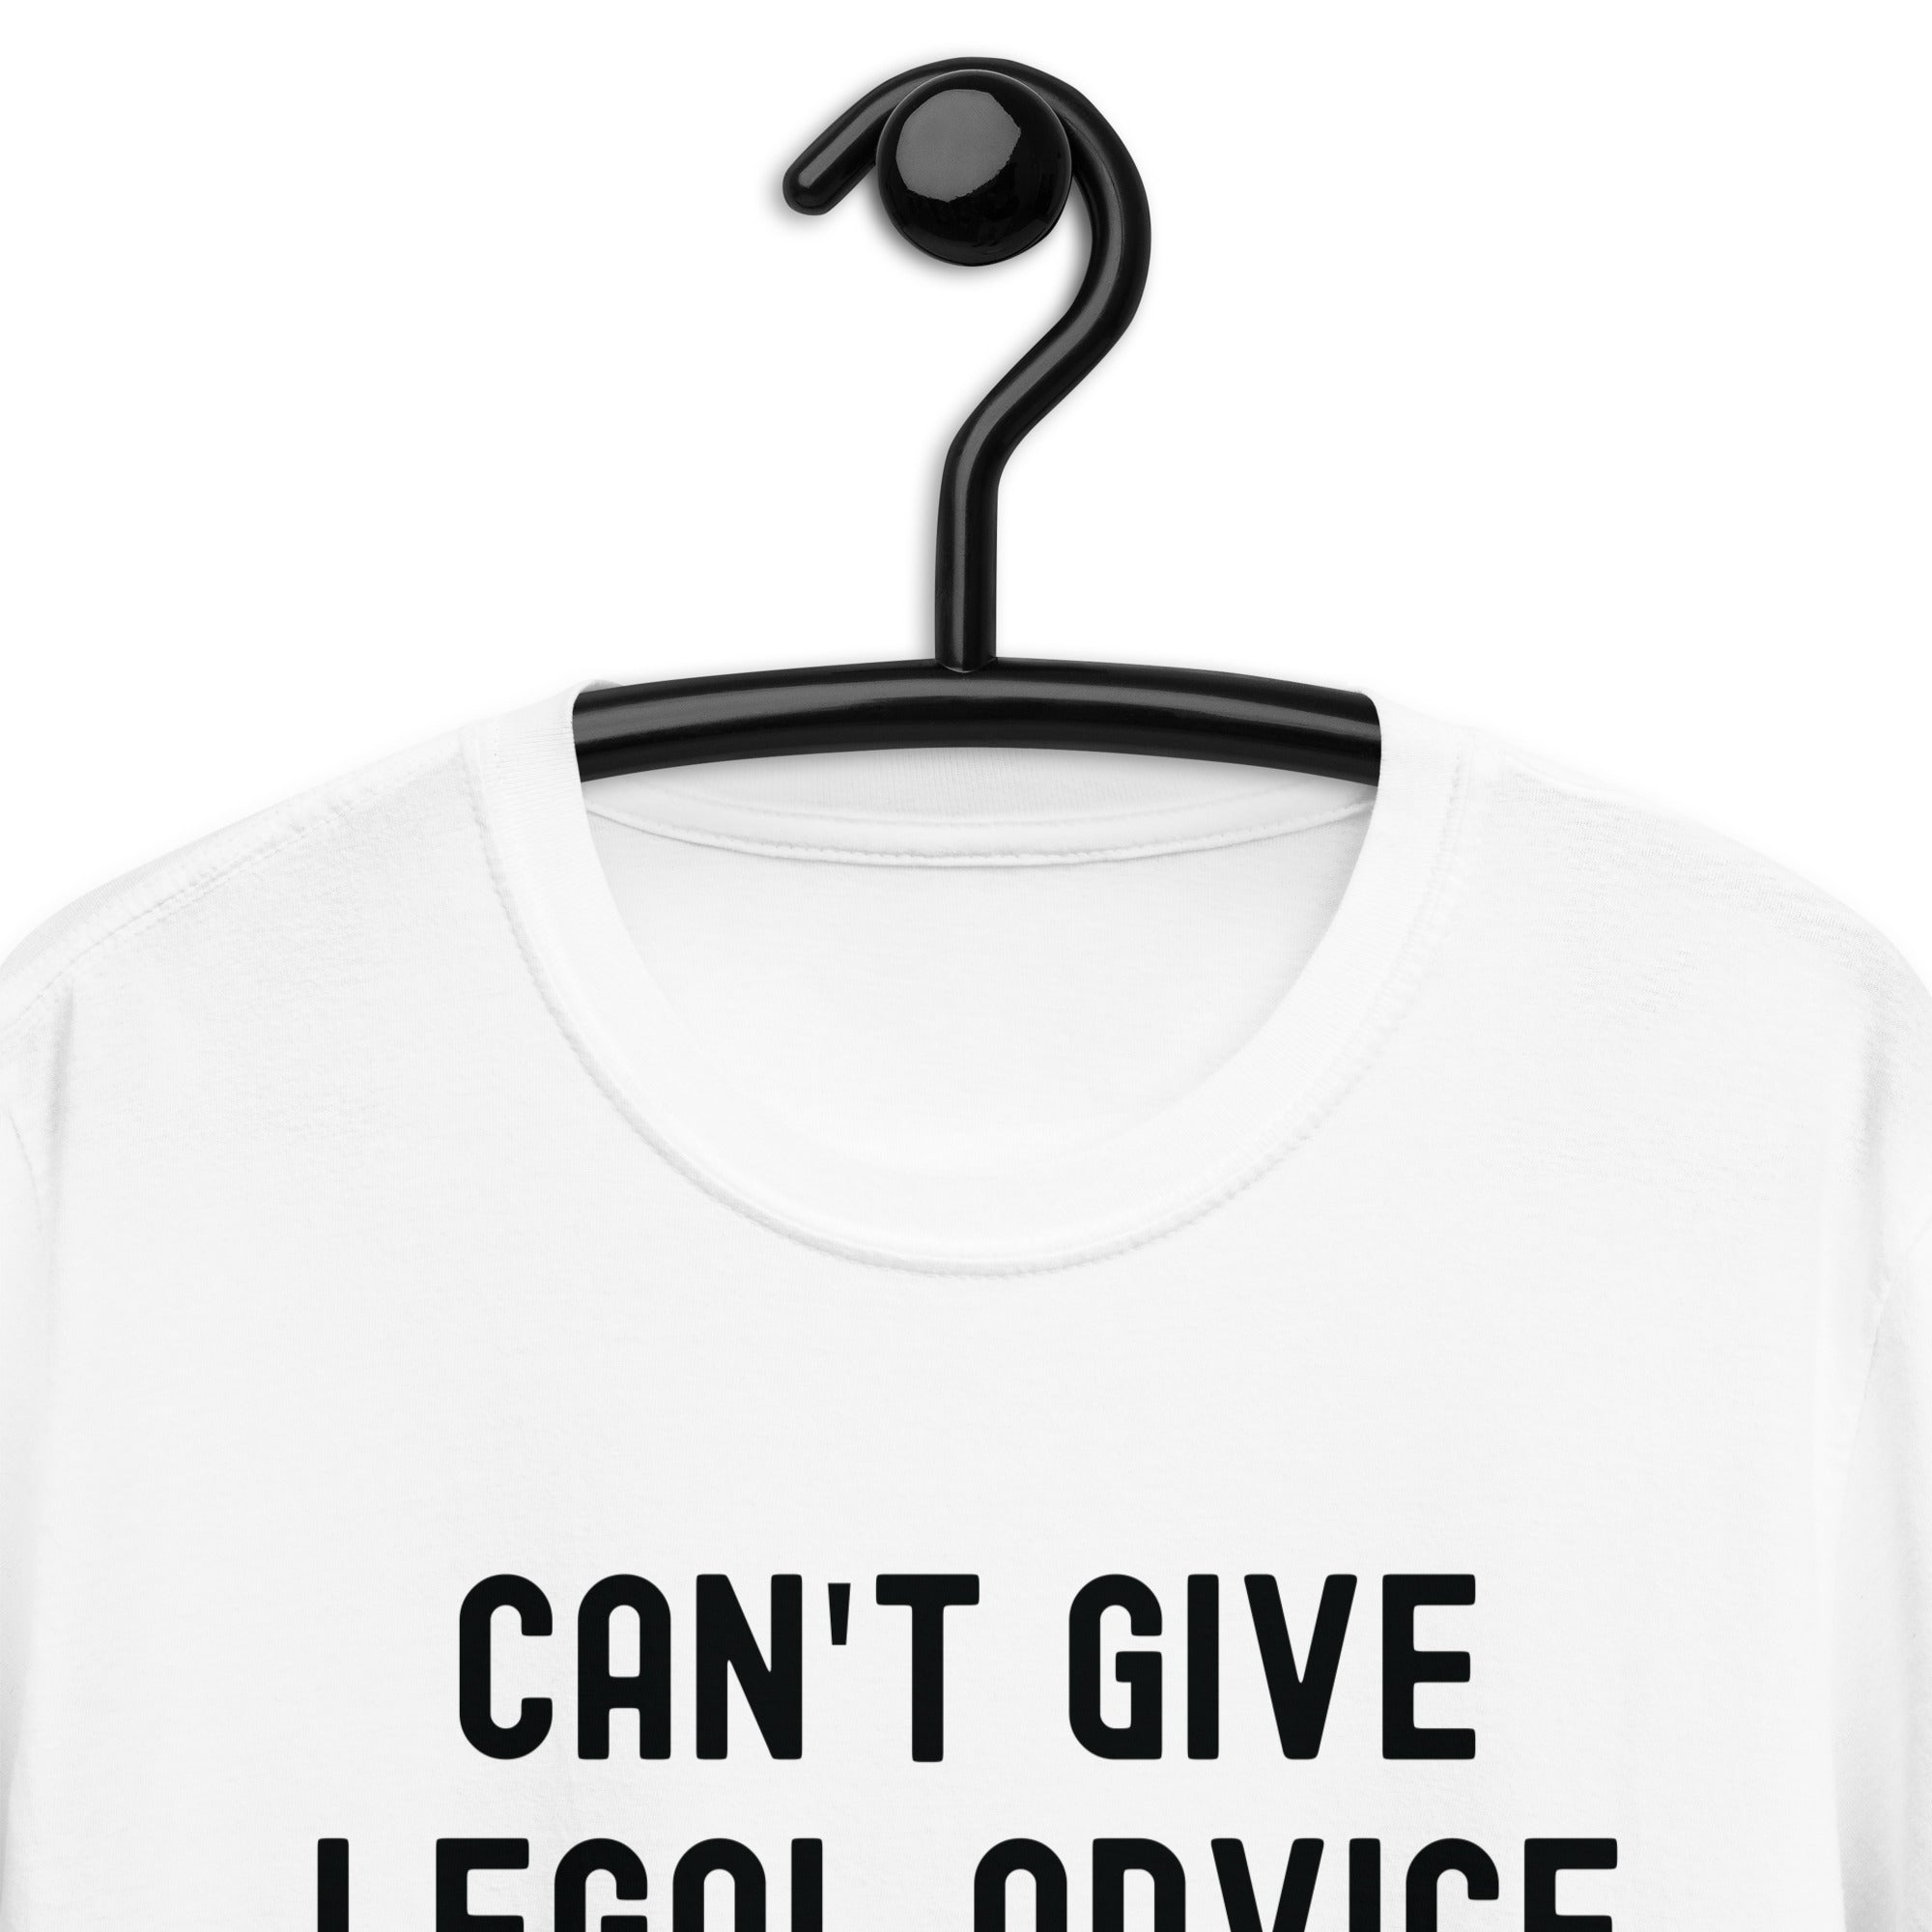 Short-Sleeve Unisex T-Shirt | Can’t give legal advice without coffee